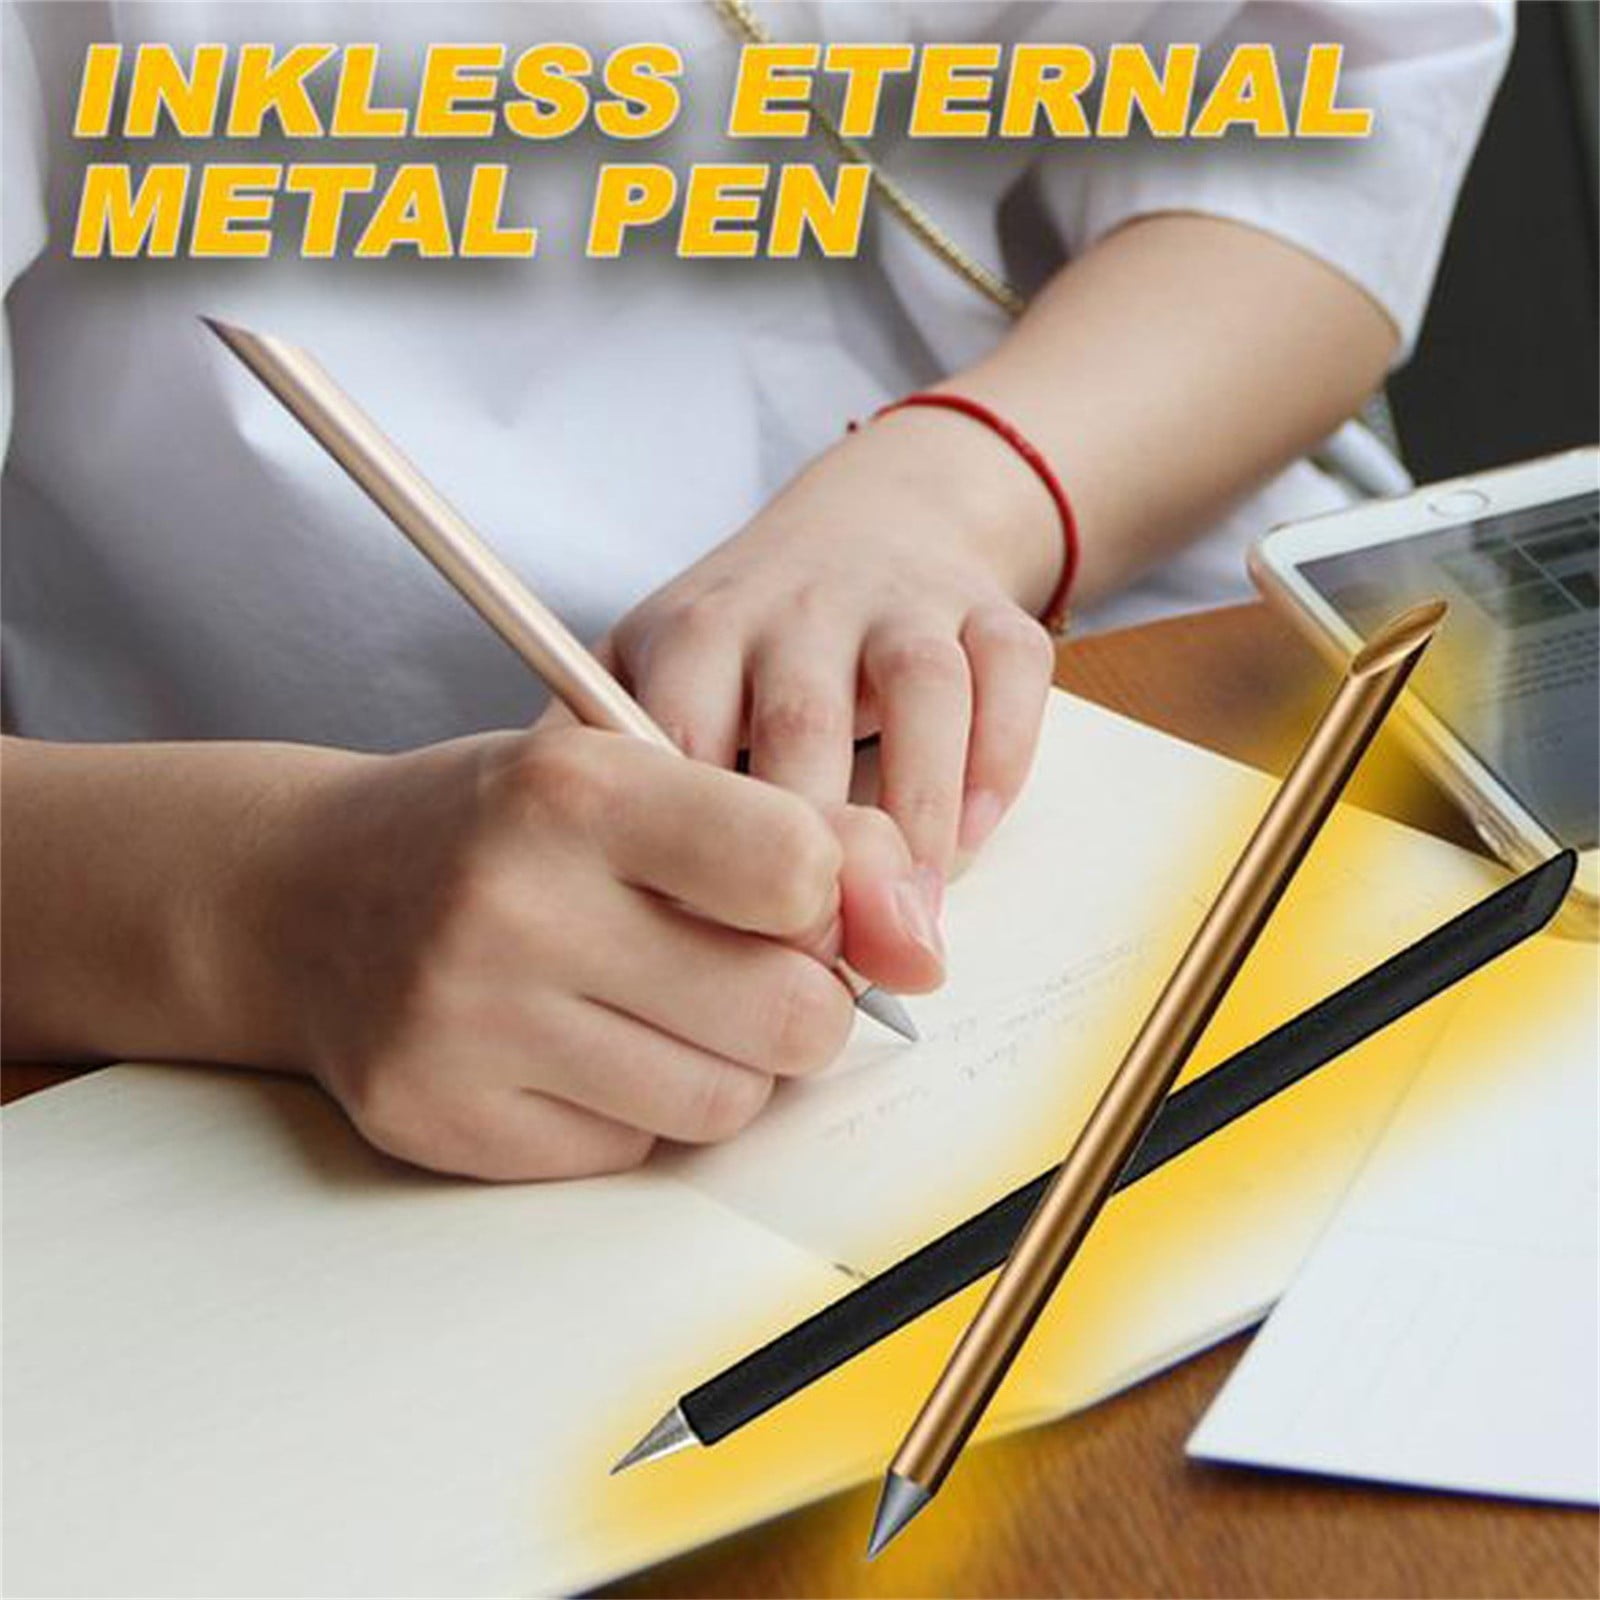 Inkless Eternal Metal Pen New Design Office Sign Pen Collectible Birthday Gift 